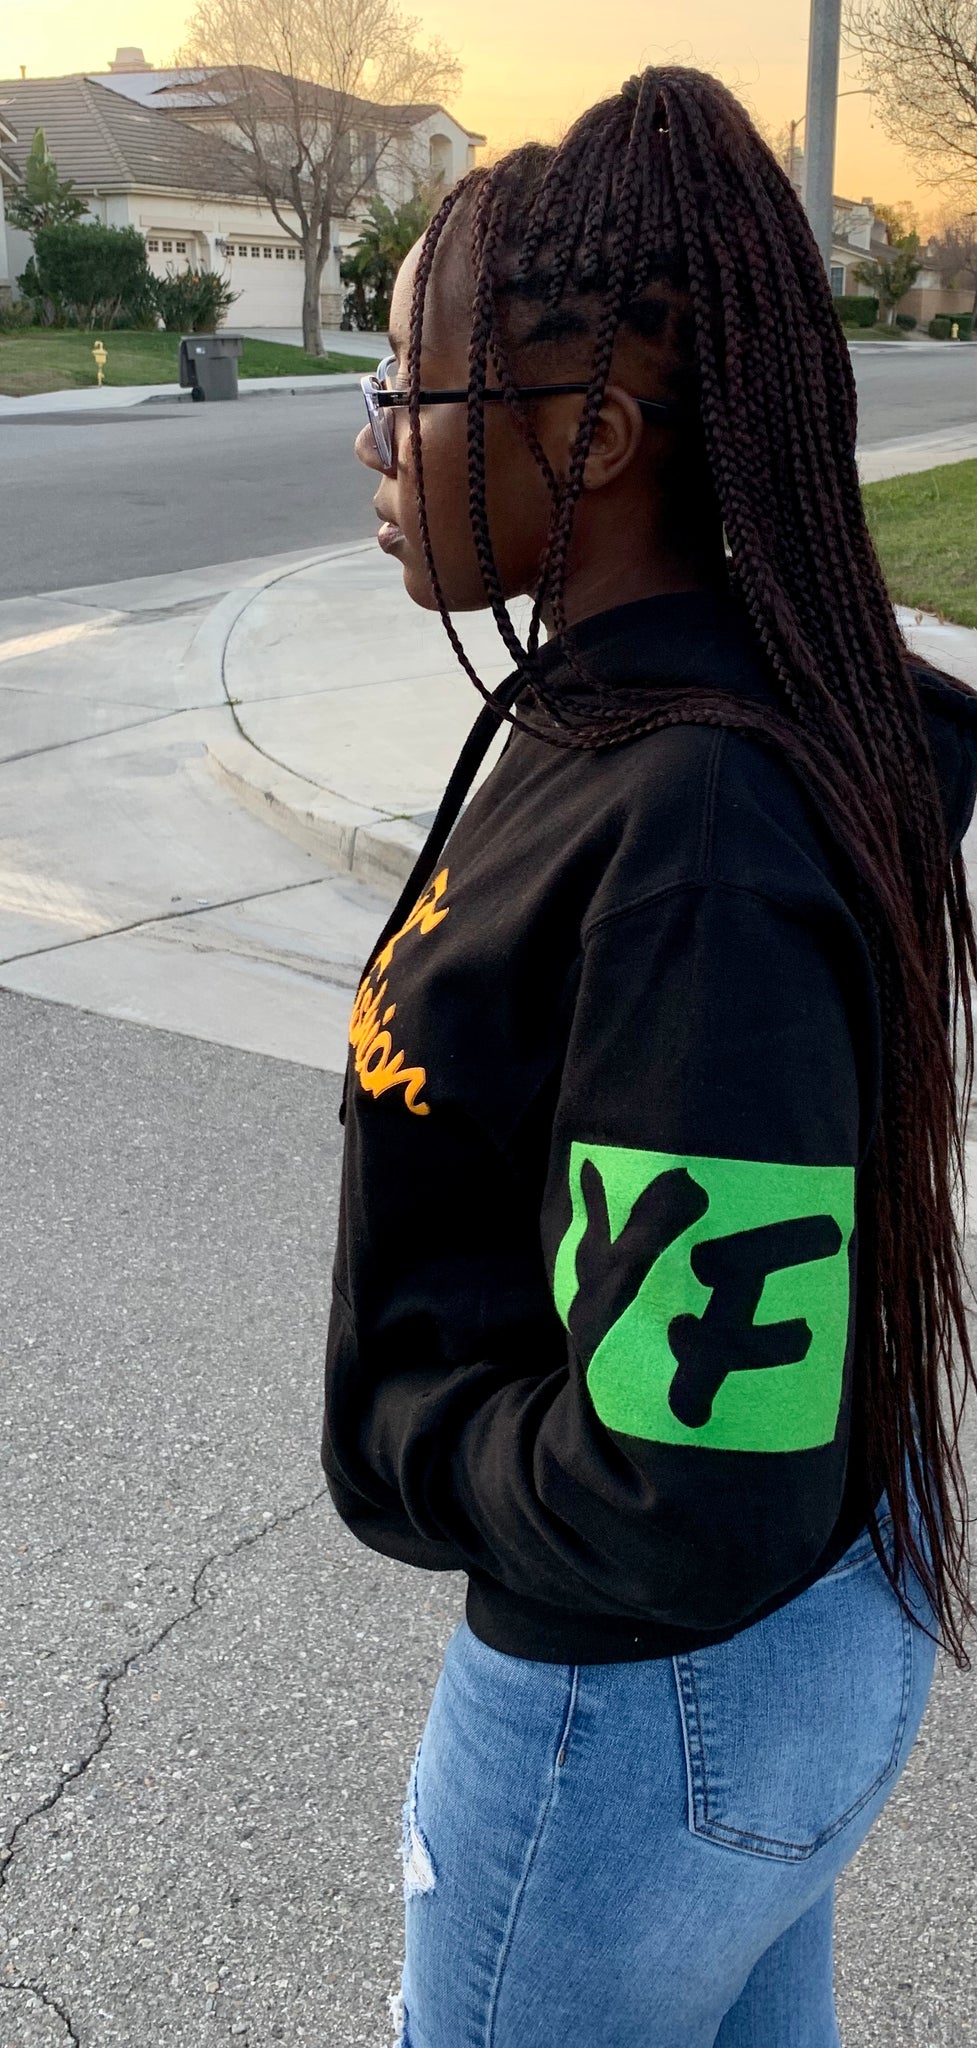 YOUNG FASHION "BLACK HISTORY MONTH" UNISEX HOODIE